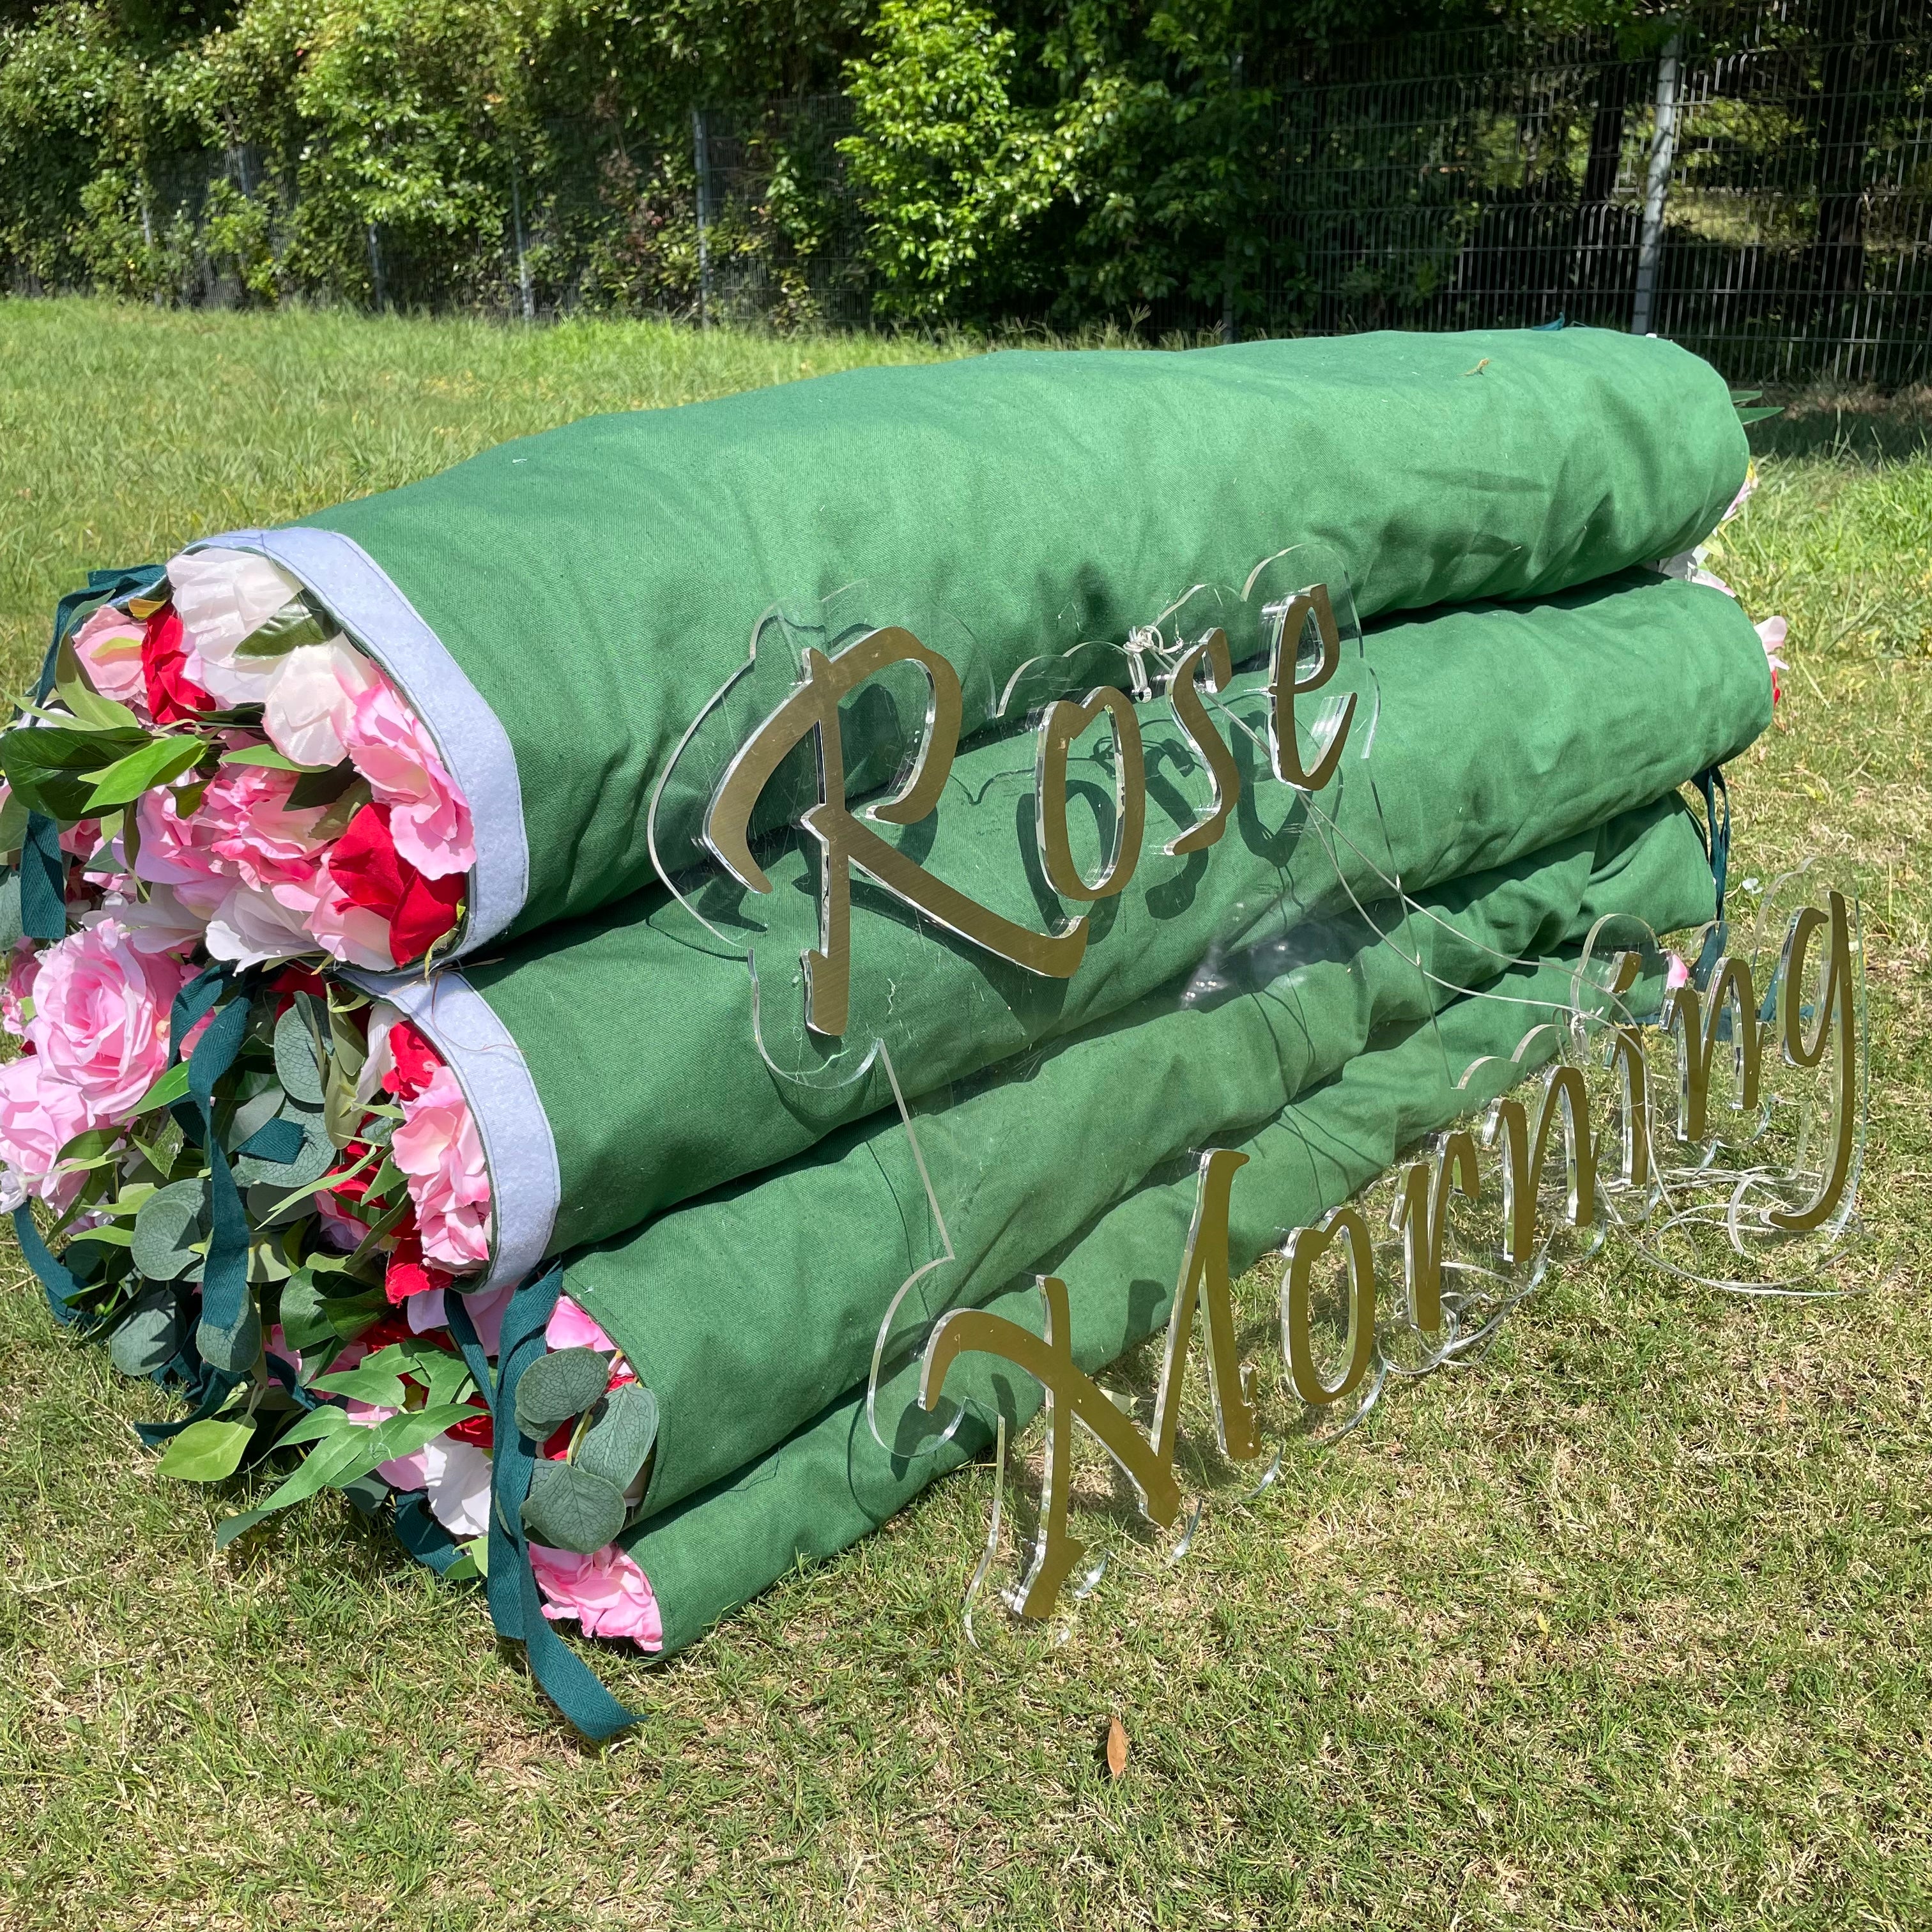 Rose Morning“The flower walls are made of artificial flowers in various colors, layered at different levels to create a lush, elegant and natural look. The exclusive zipper design and roll-up design make it easy to install and remove.”